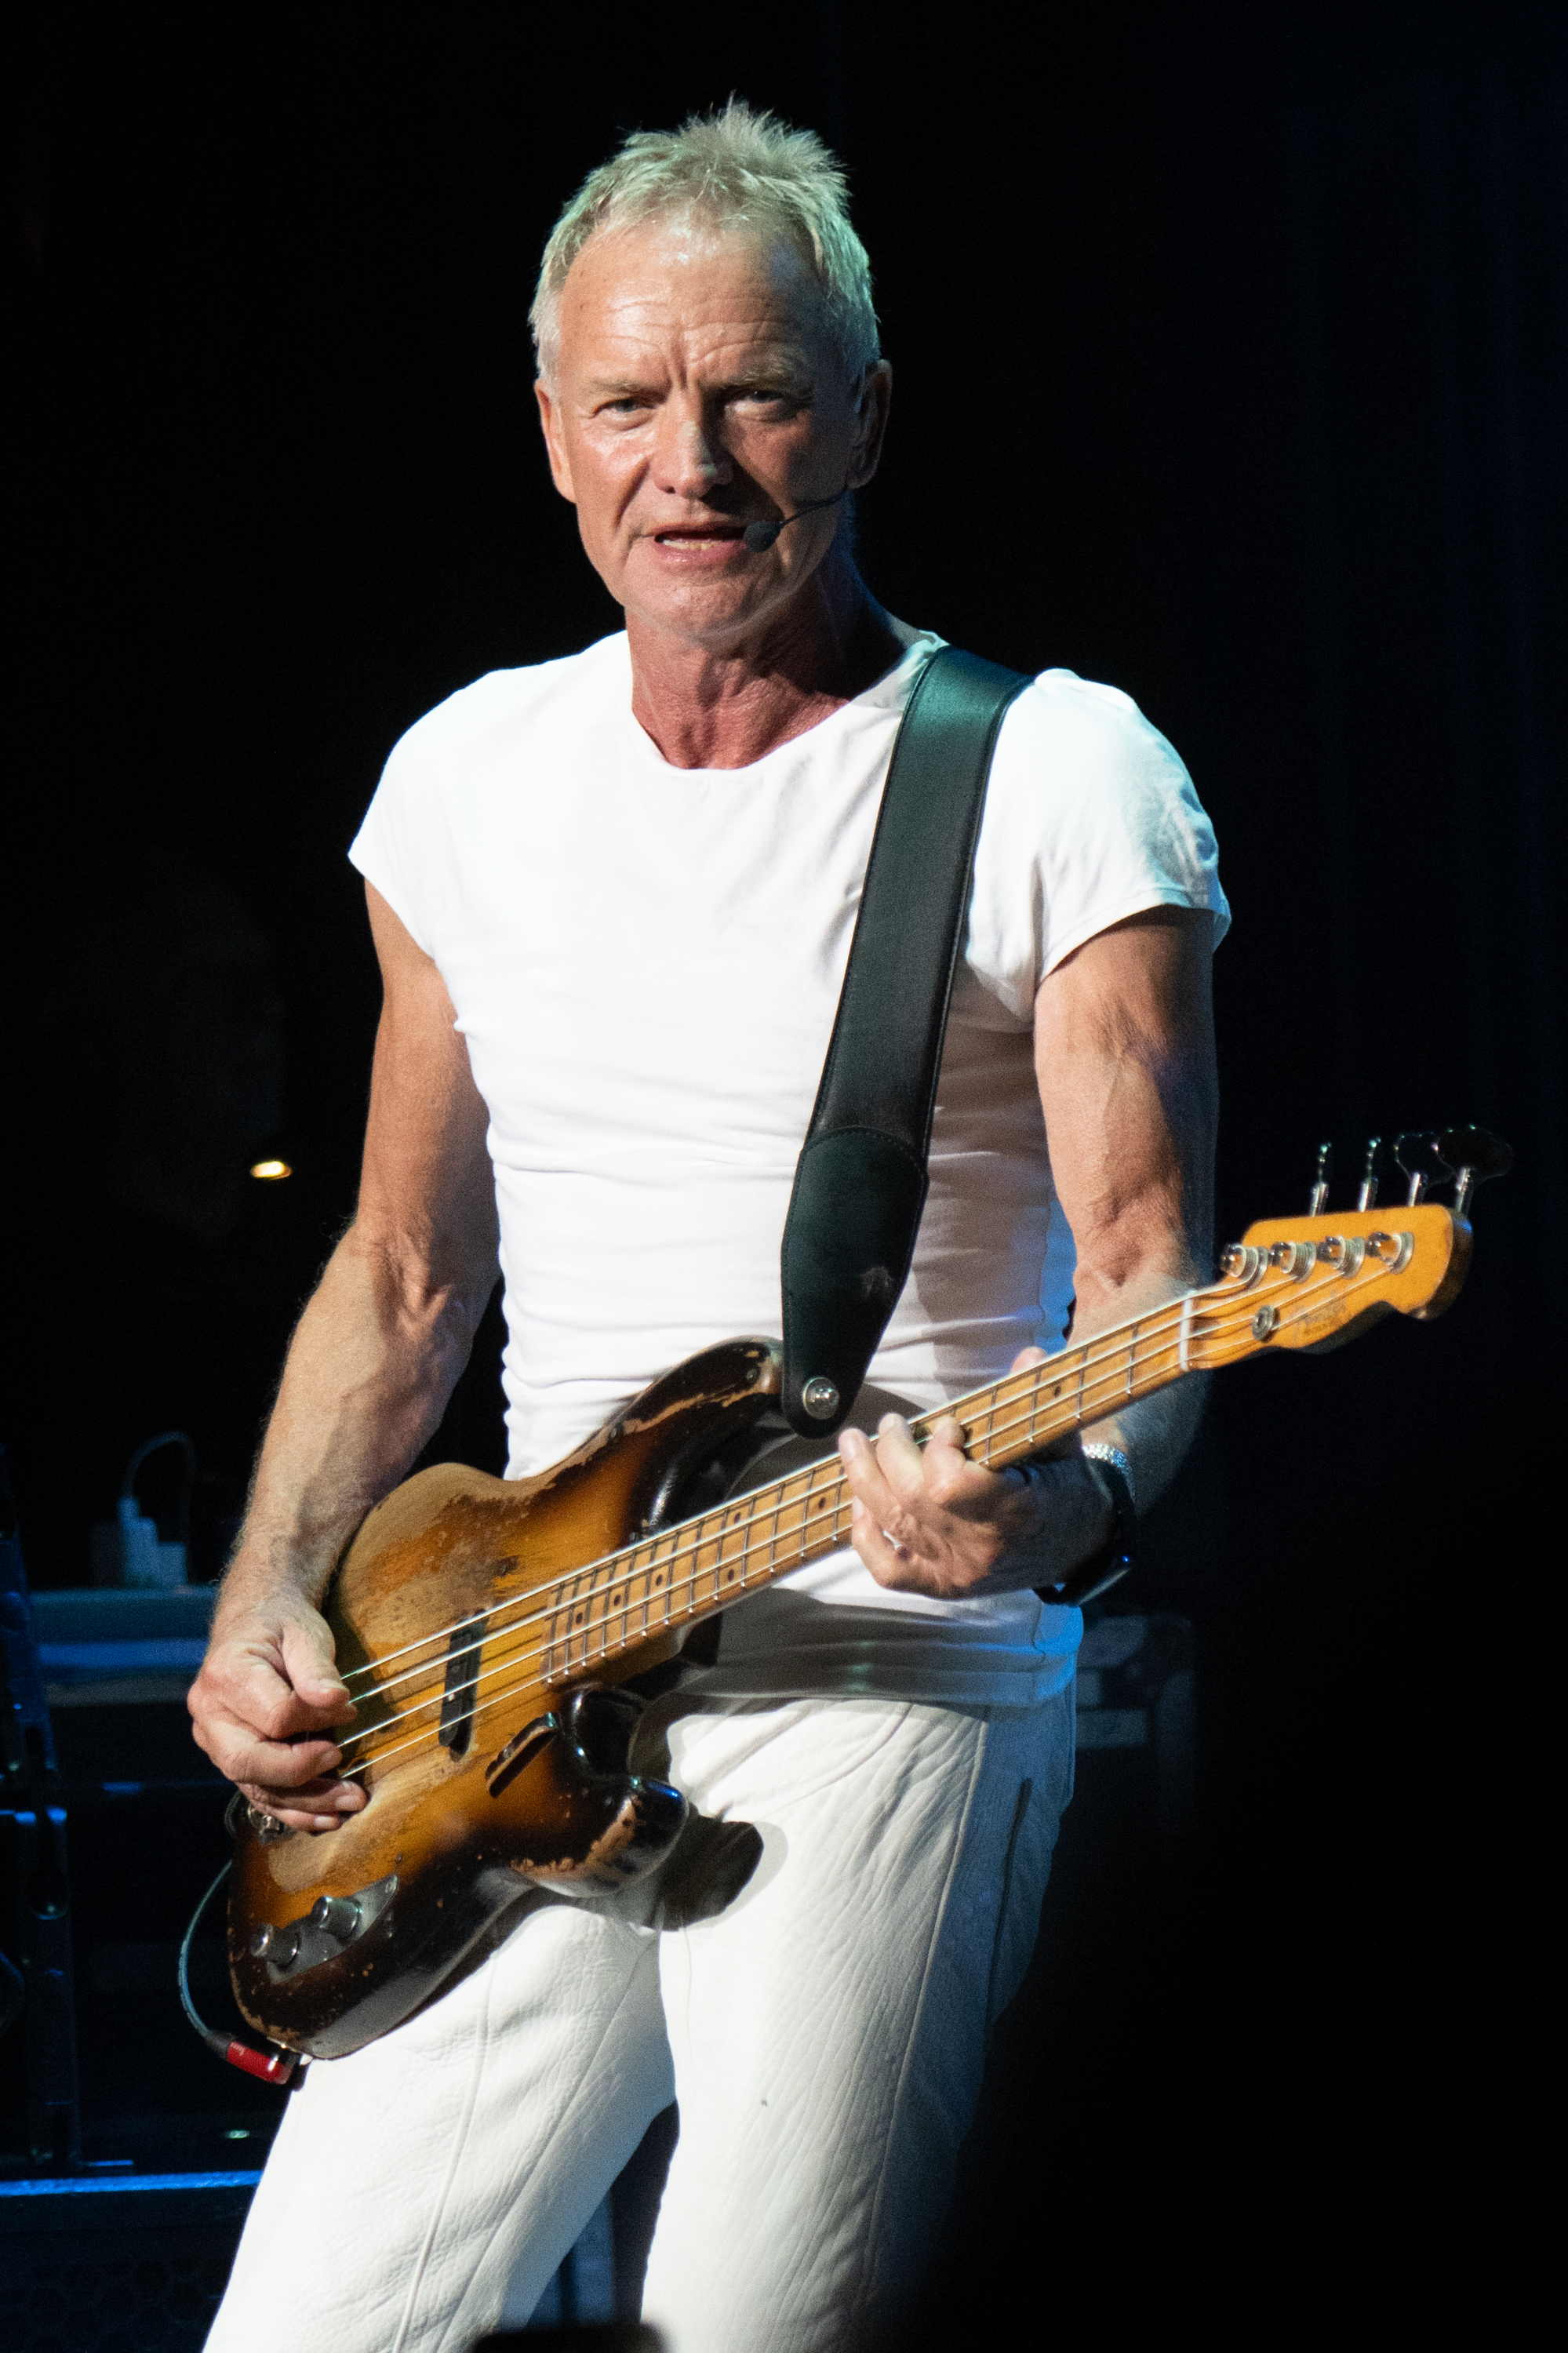 Sting onstage playing the guitar